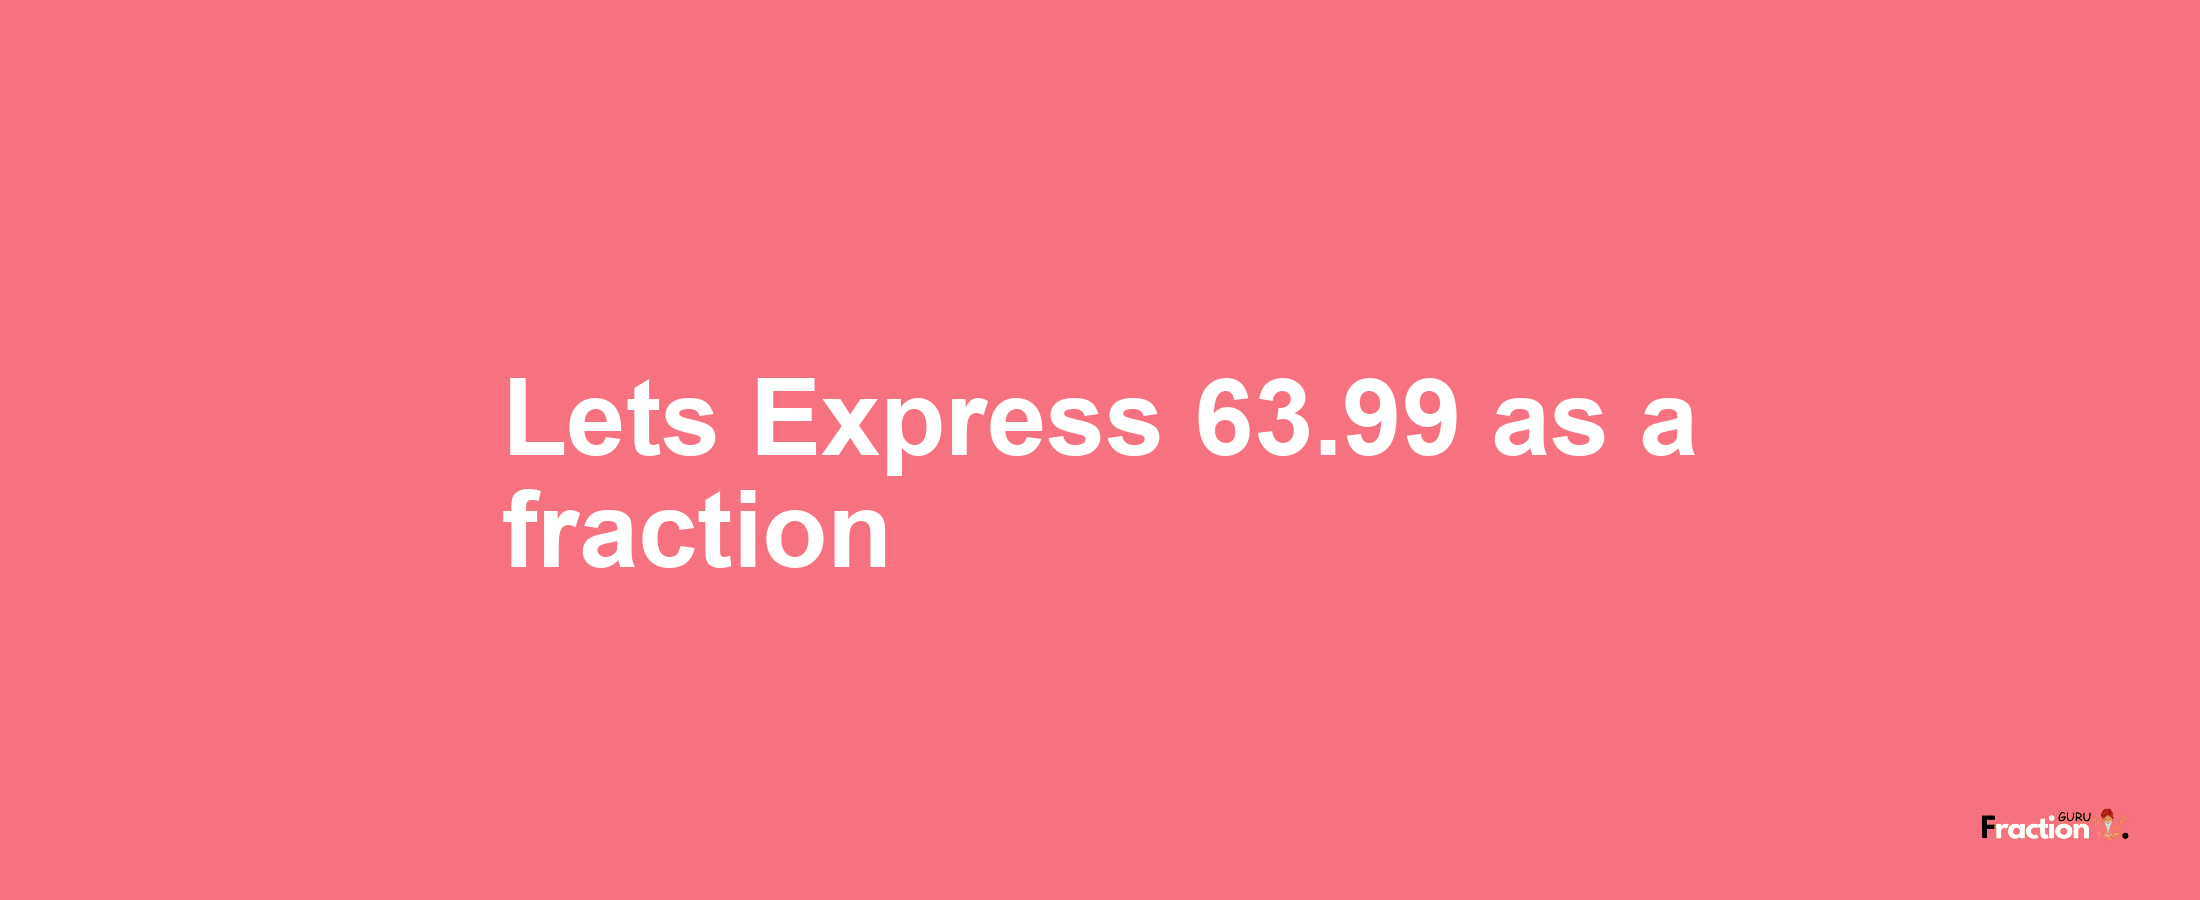 Lets Express 63.99 as afraction